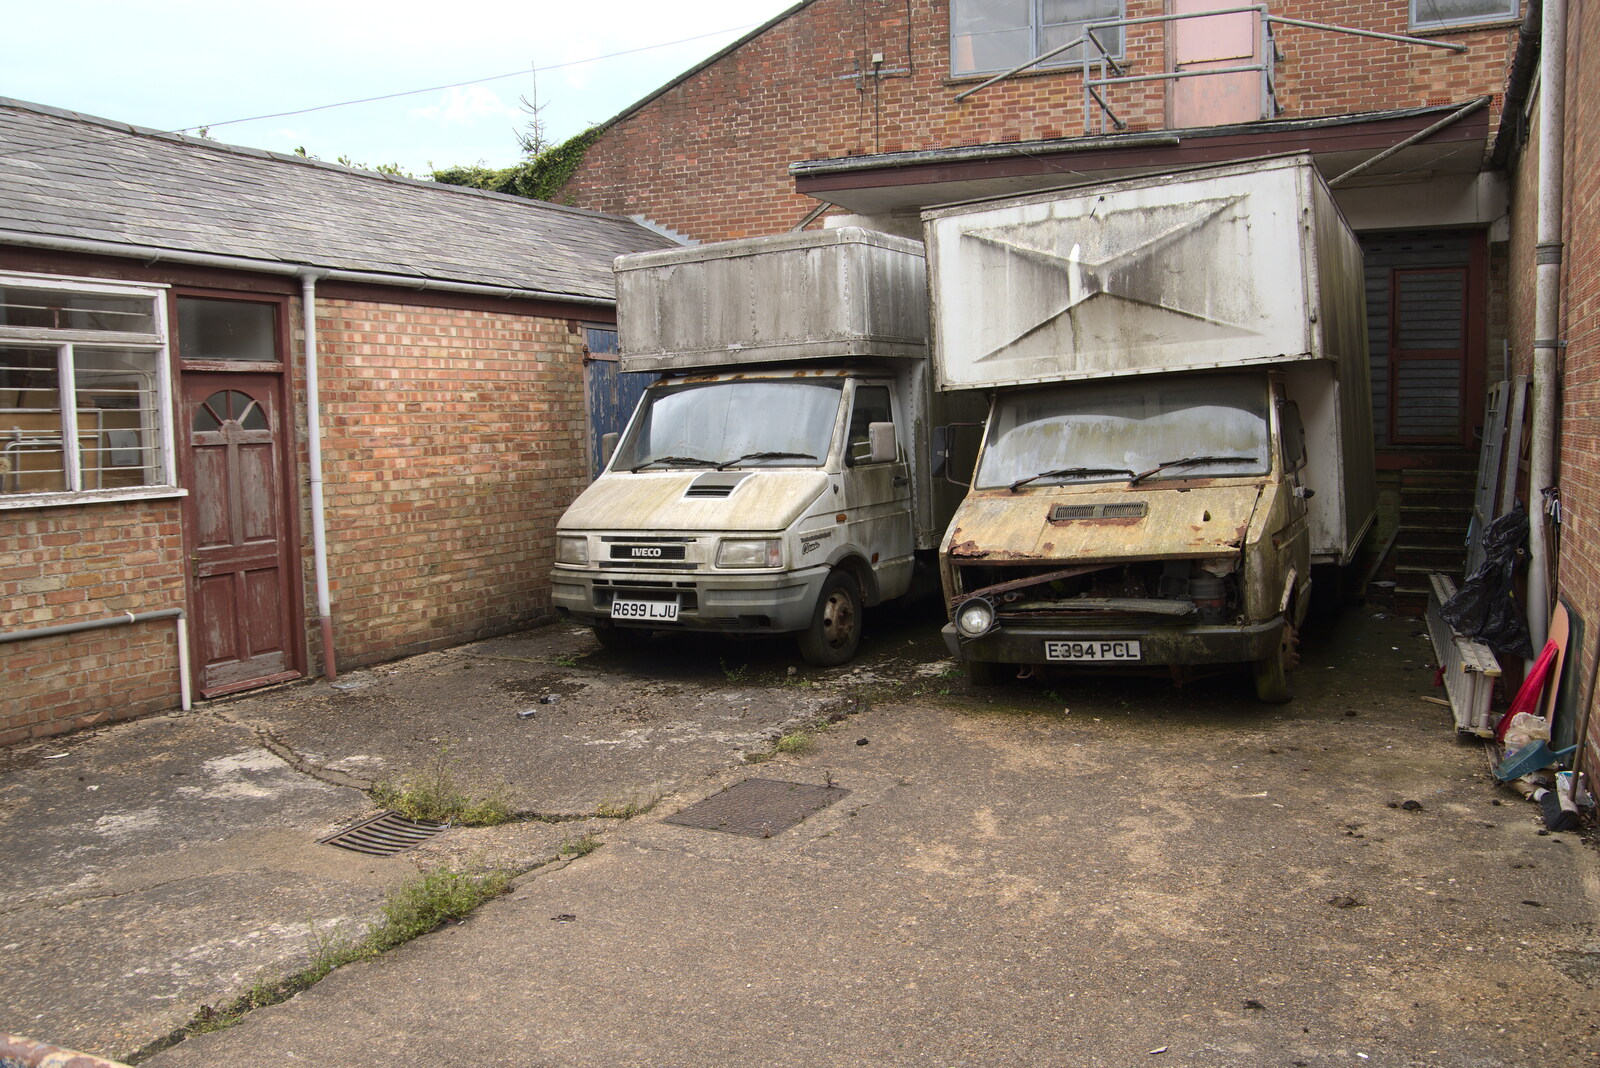 A pair of very derelict vans from A Vaccination Afternoon, Swaffham, Norfolk - 9th May 2021